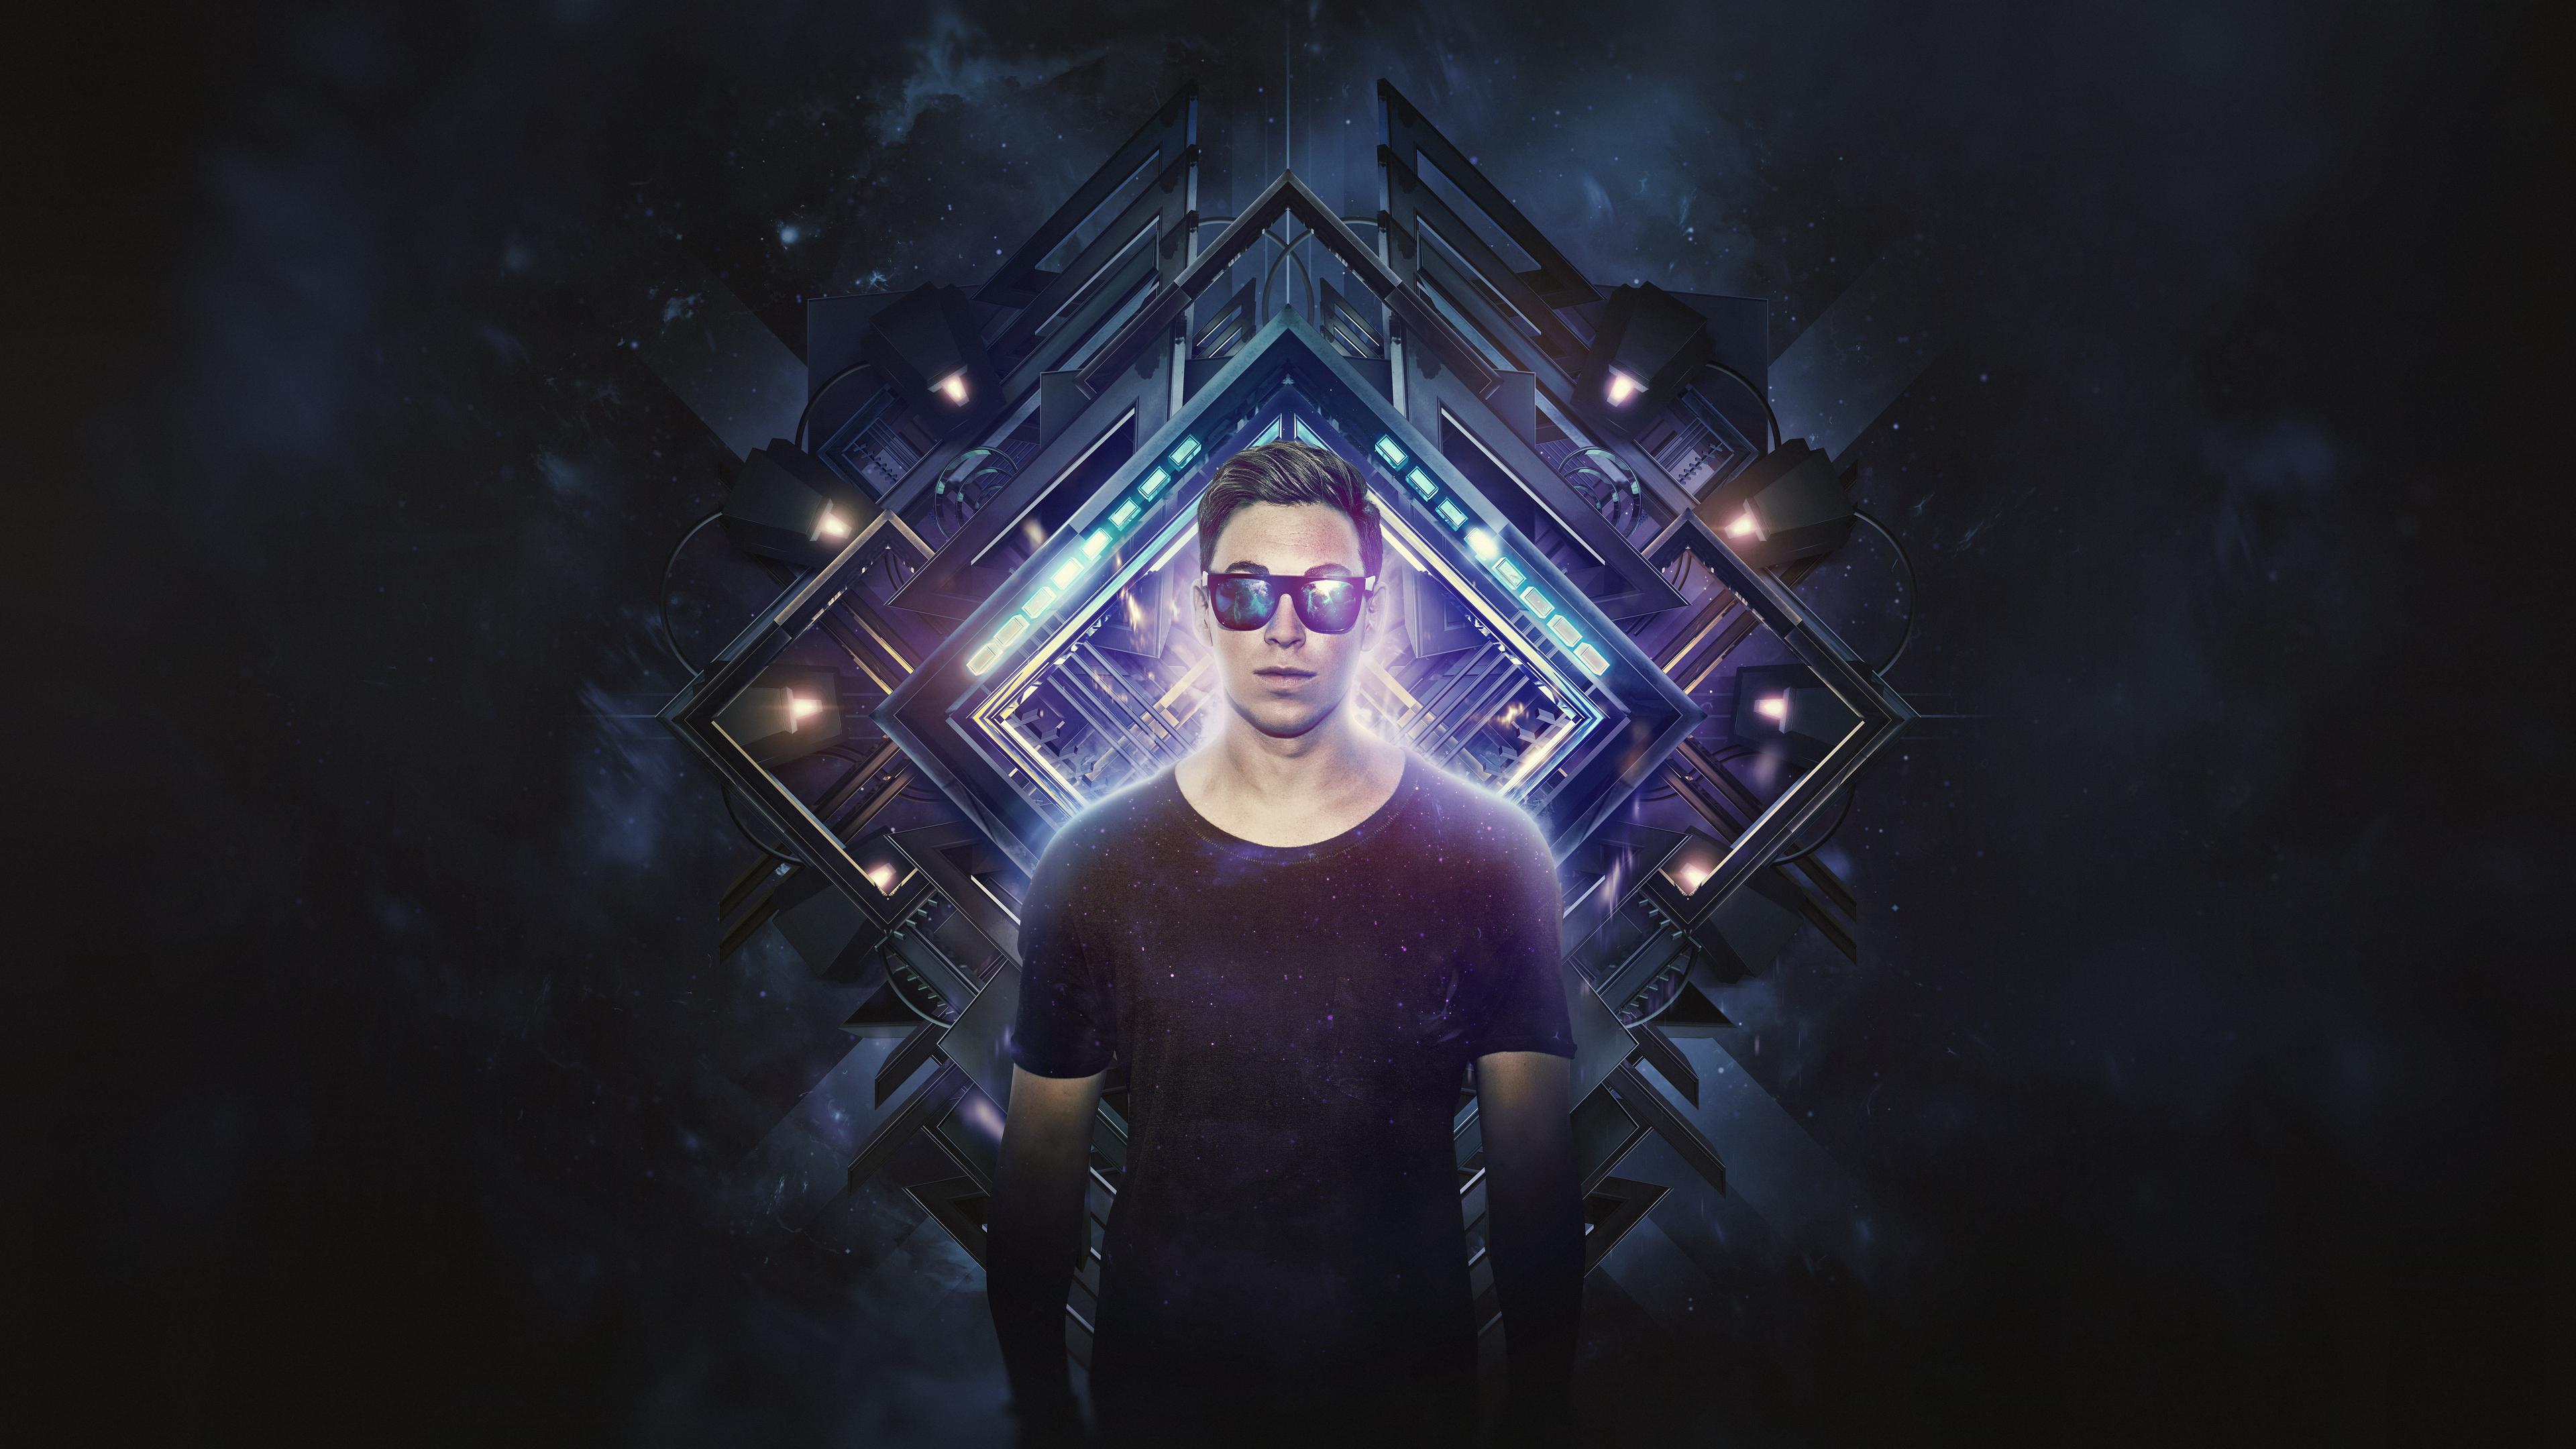 Hardwell Wallpapers